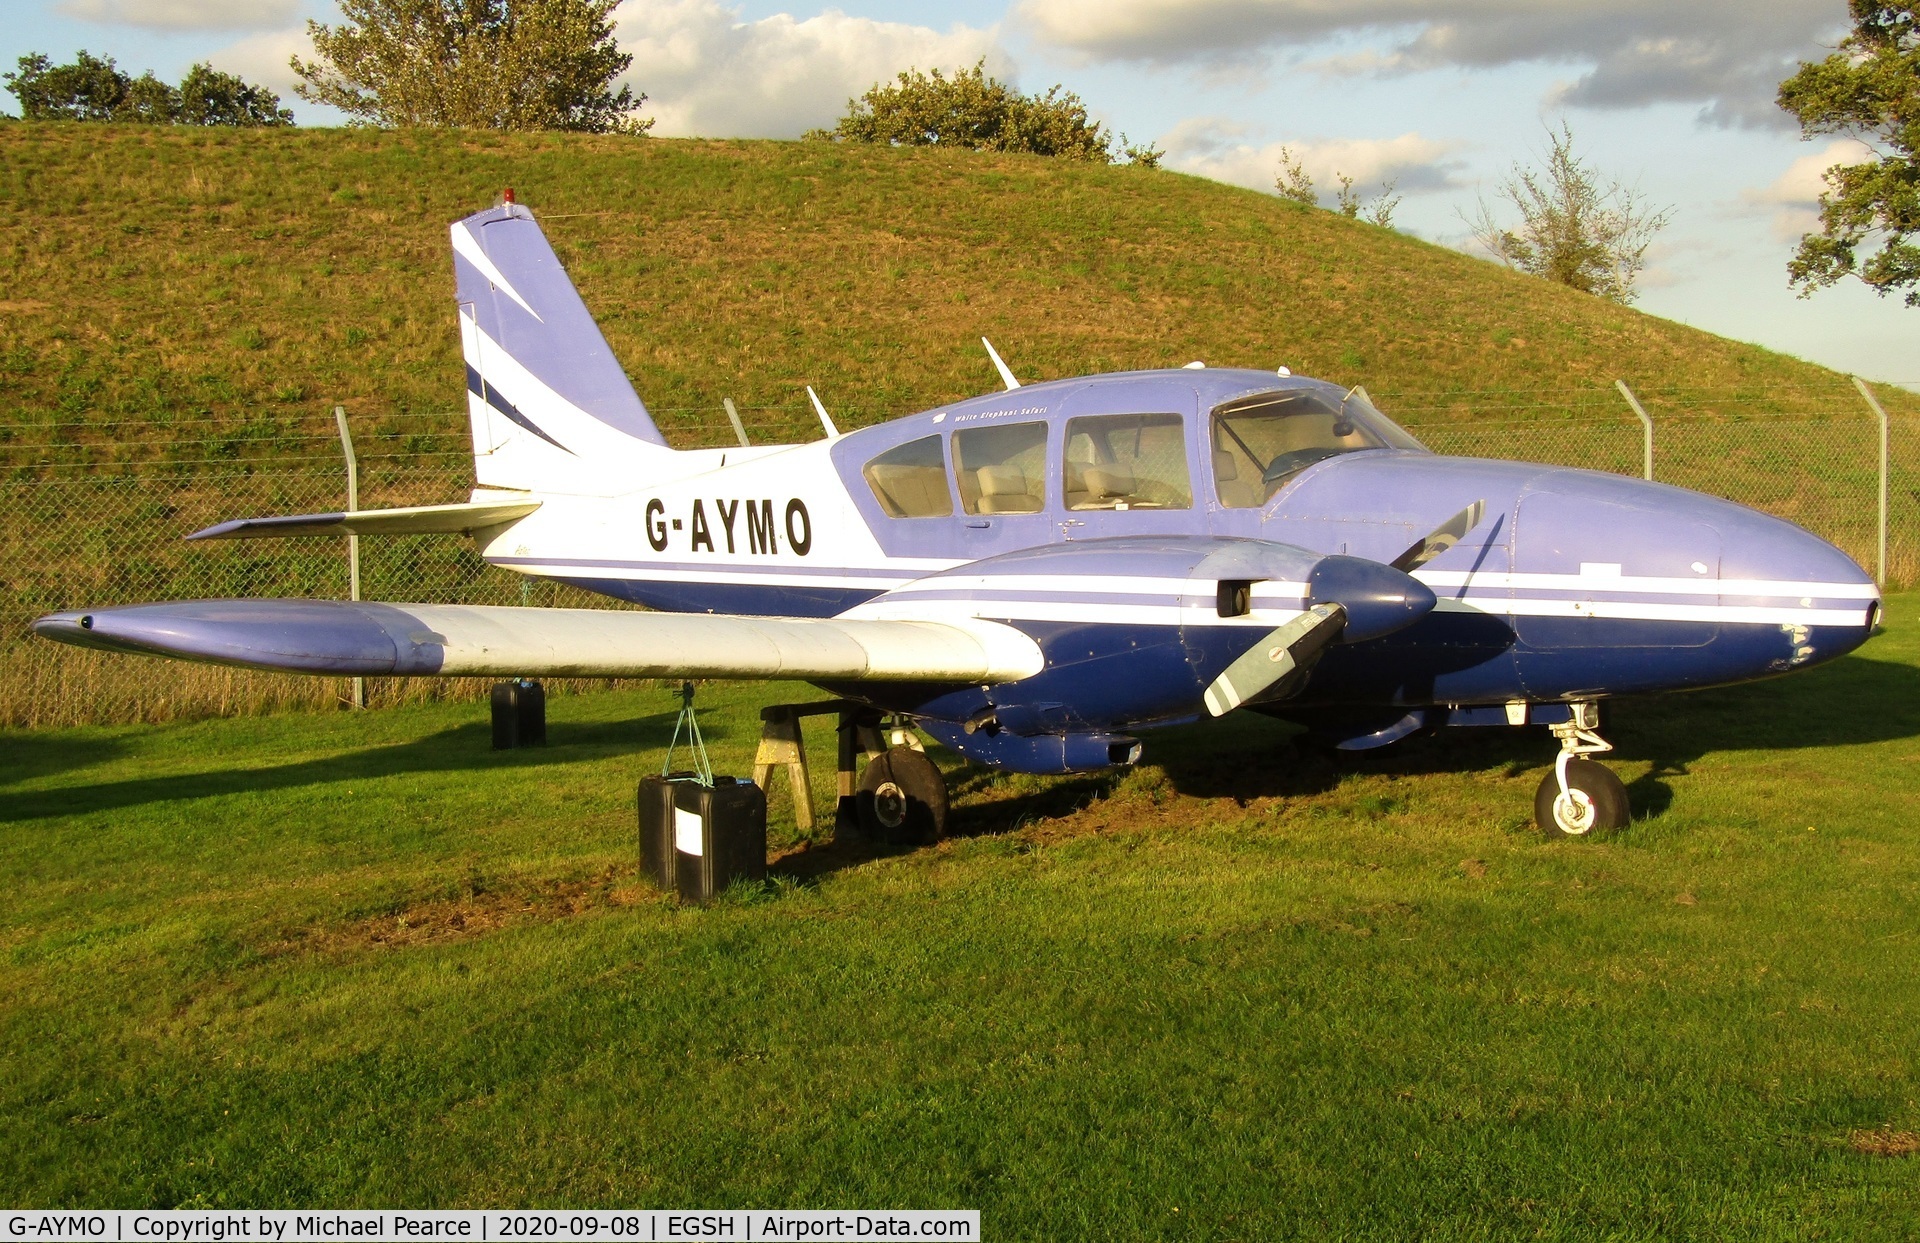 G-AYMO, 1965 Piper PA-23-250 Aztec C/N 27-2995, Parked at City of Norwich Aviation Museum.